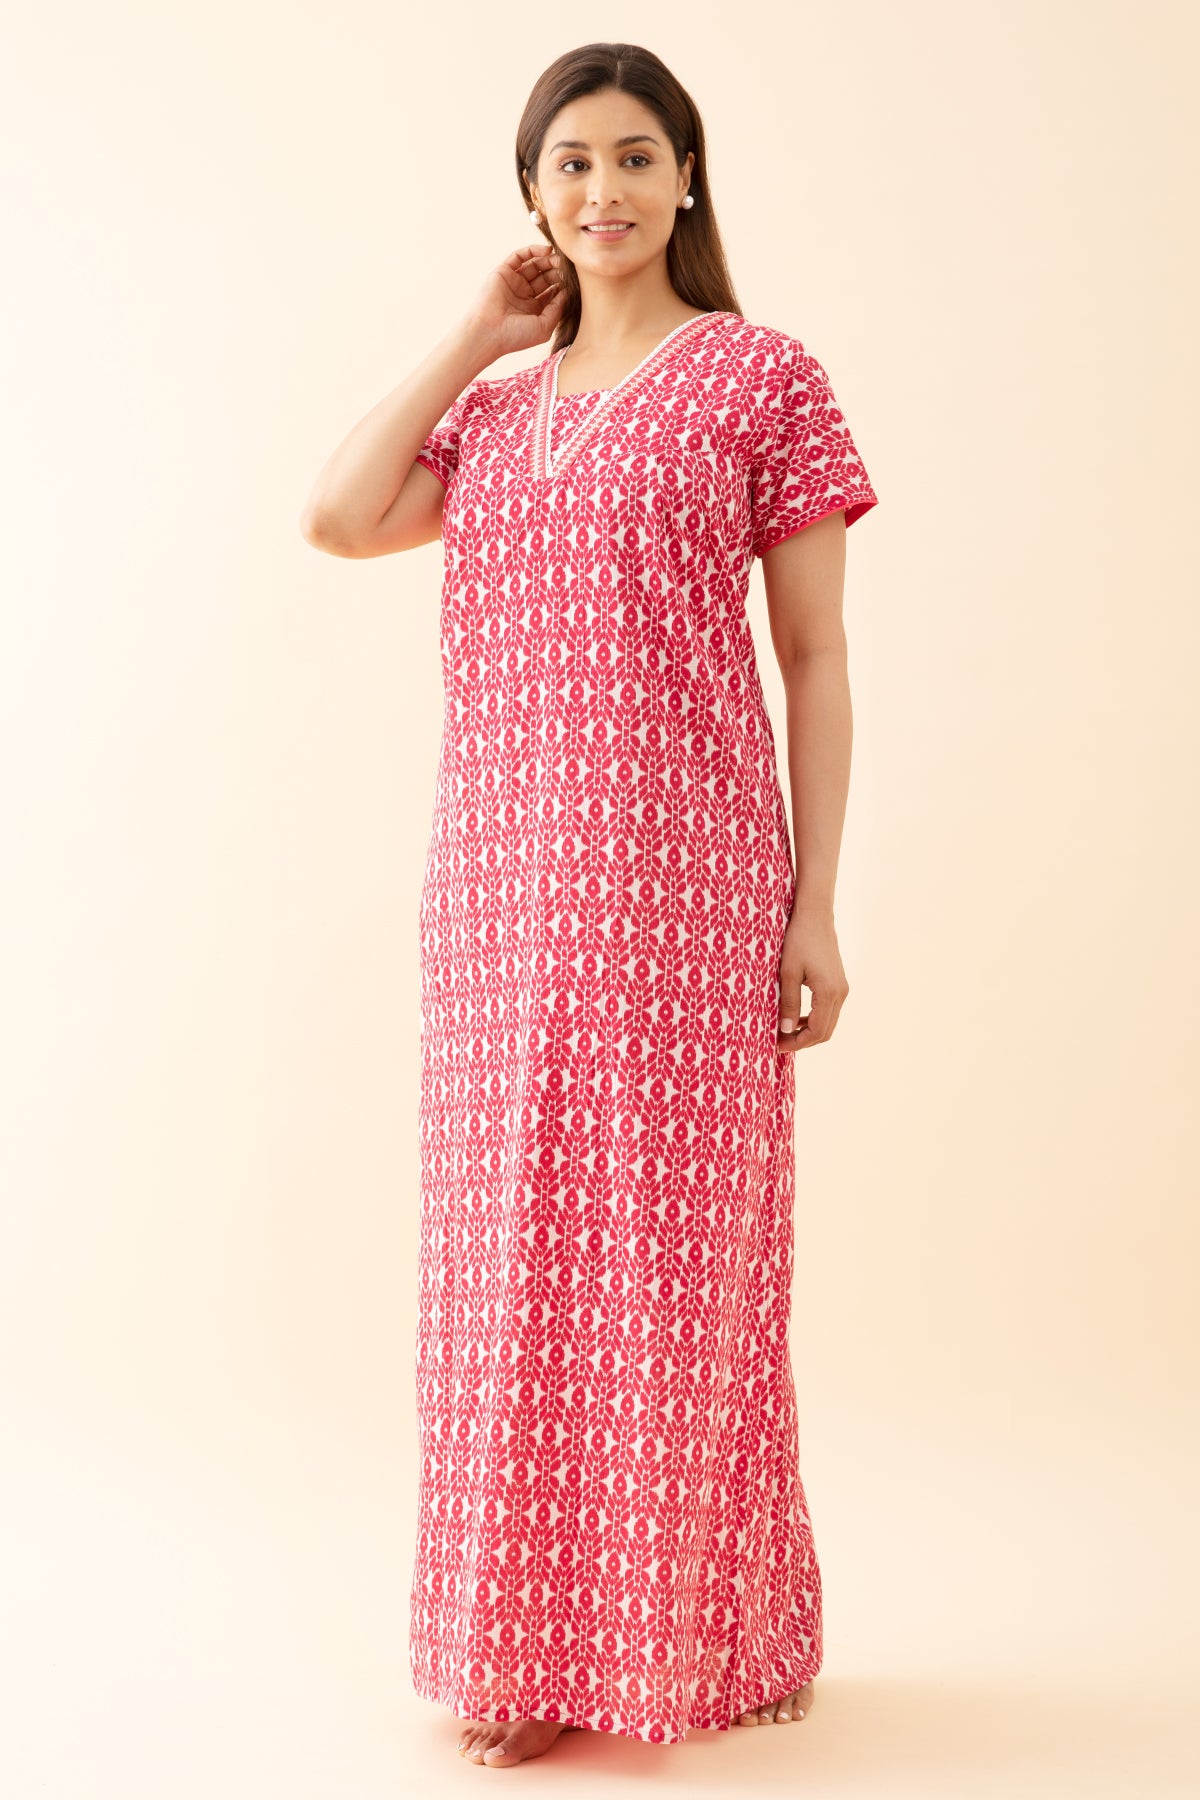 Geometric Printed Nighty with Lace Embellished Neckline Pink